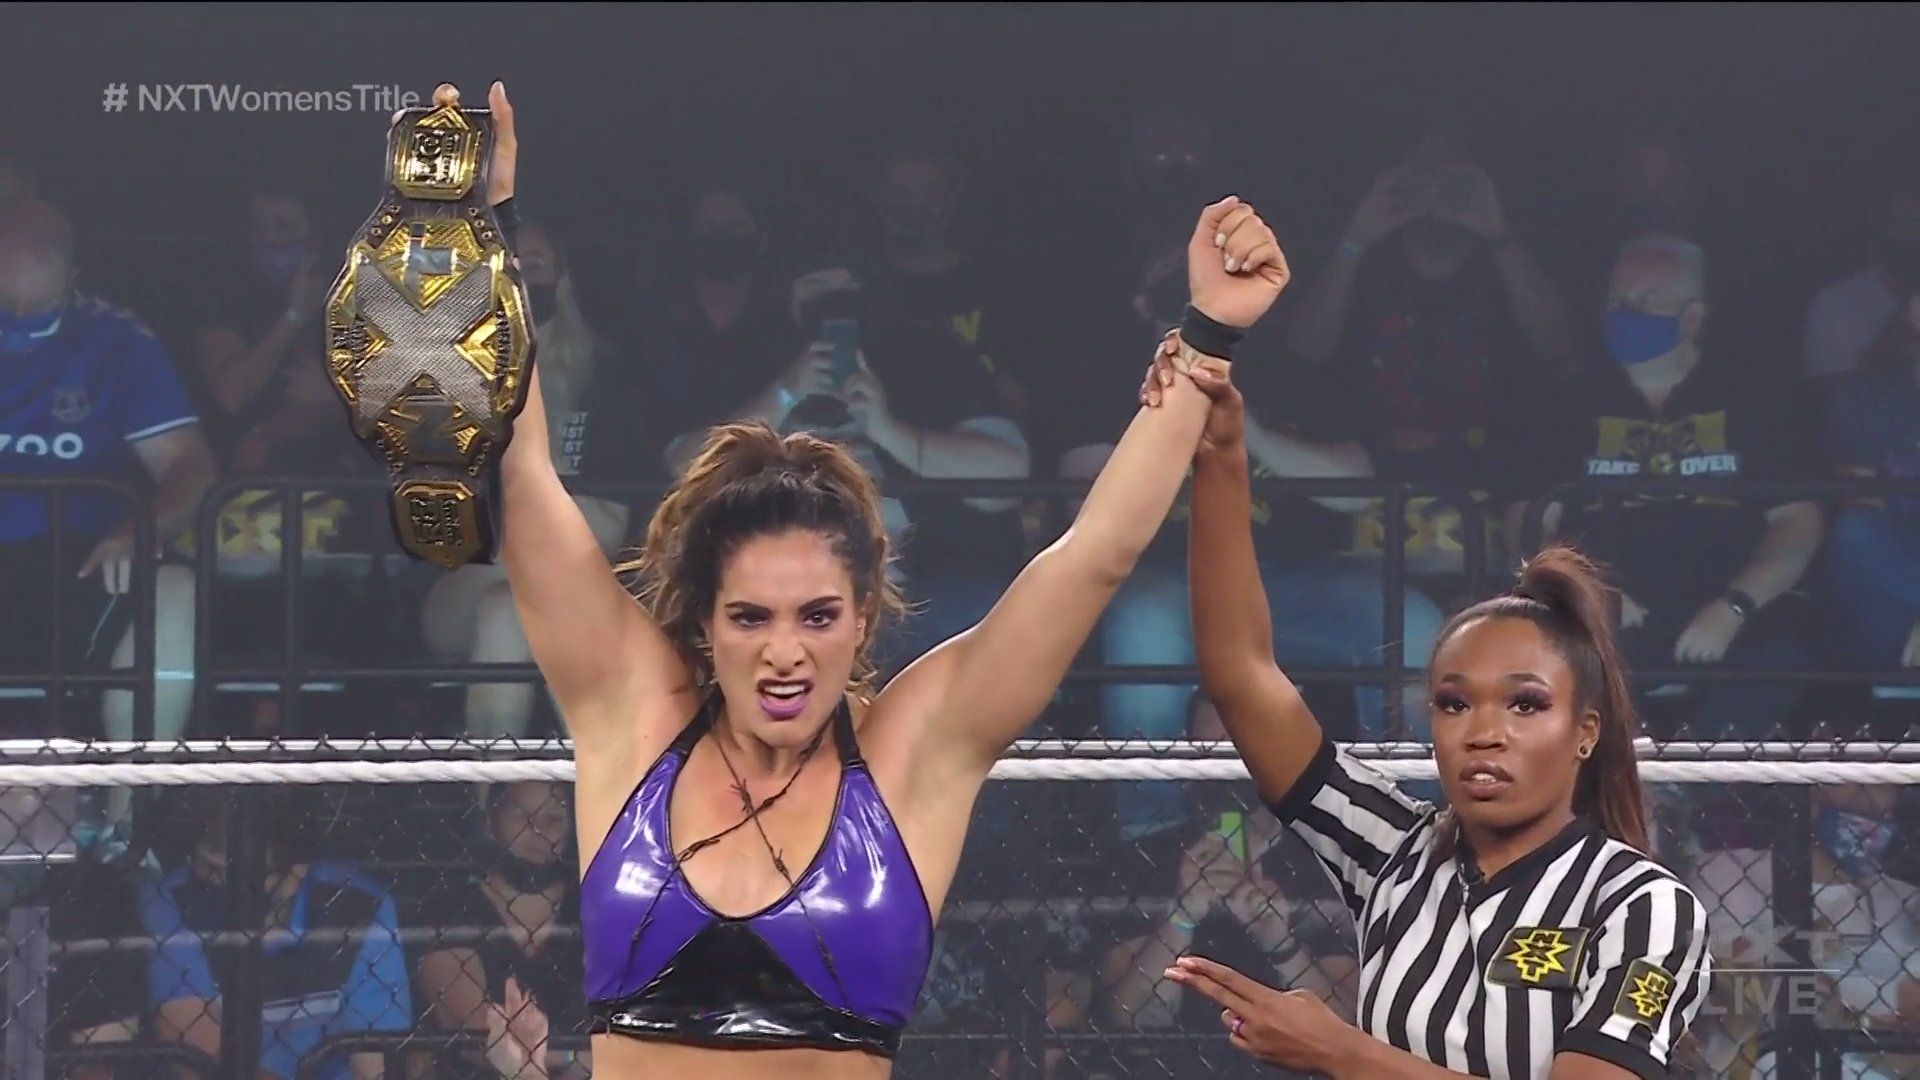 Raquel González retains the NXT Women's Championship at NXT TakeOver: In Your House